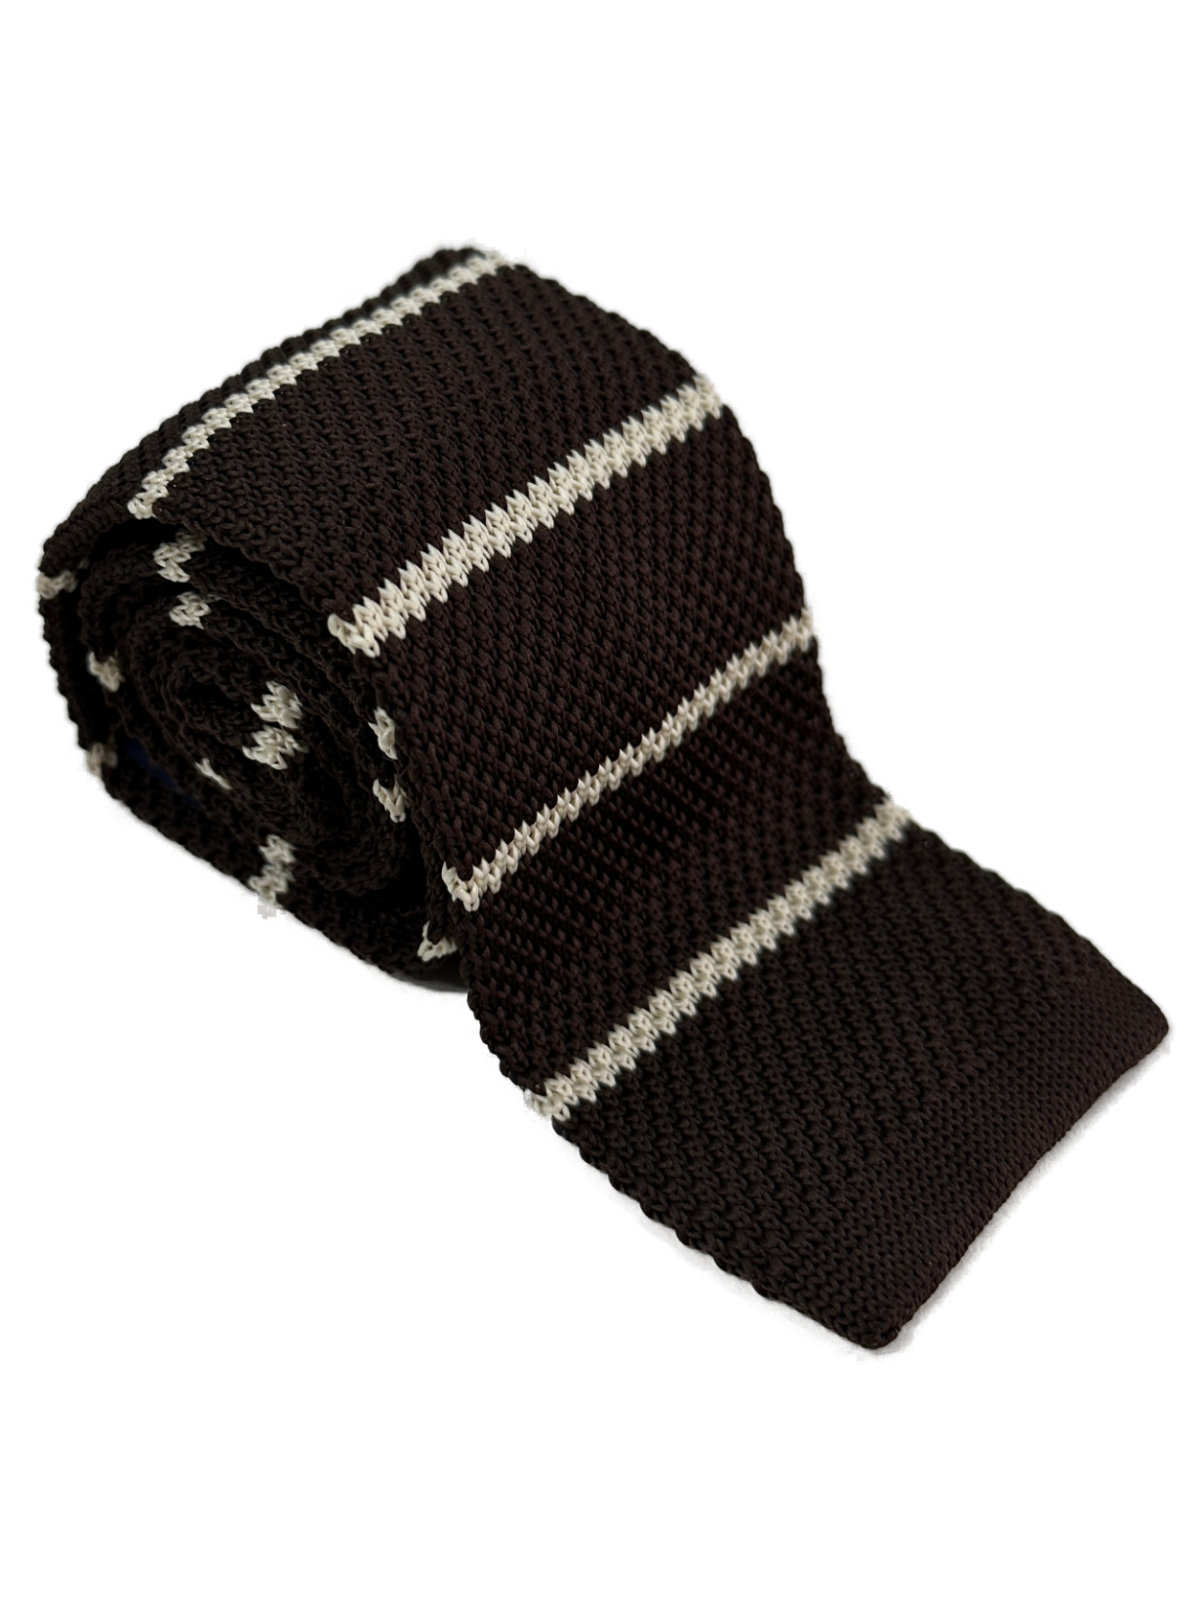 Stripe knitted tie - Brown